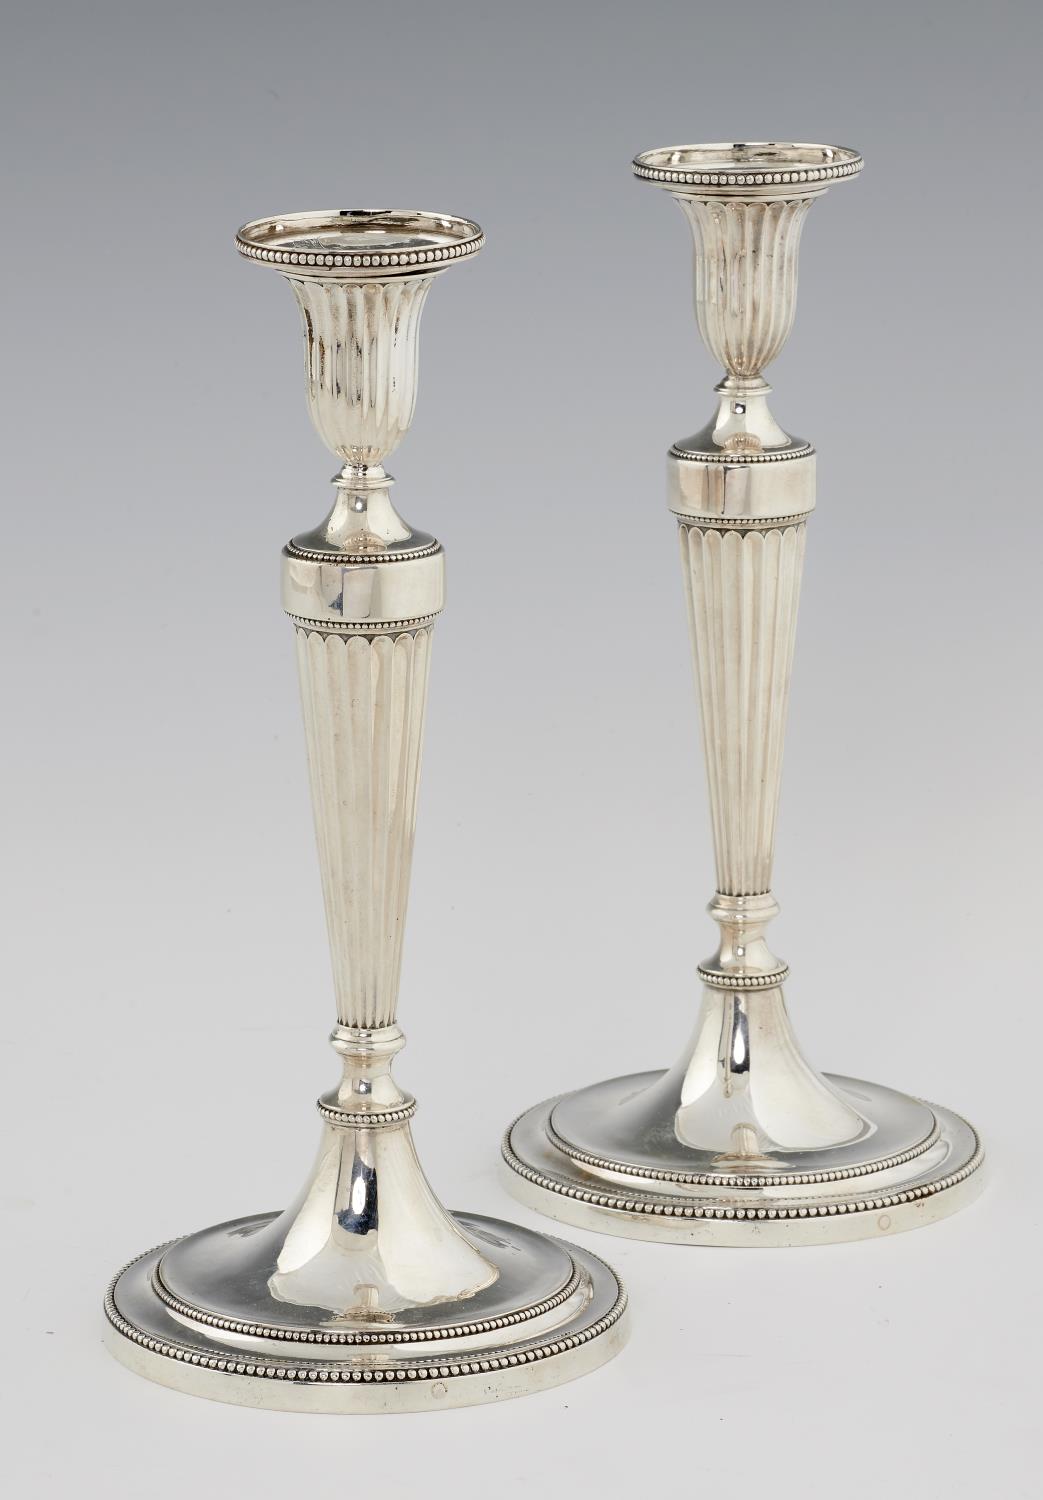 A PAIR OF GEORGE III NEO CLASSICAL SILVER CANDLESTICKS  of fluted and beaded design, crested (on